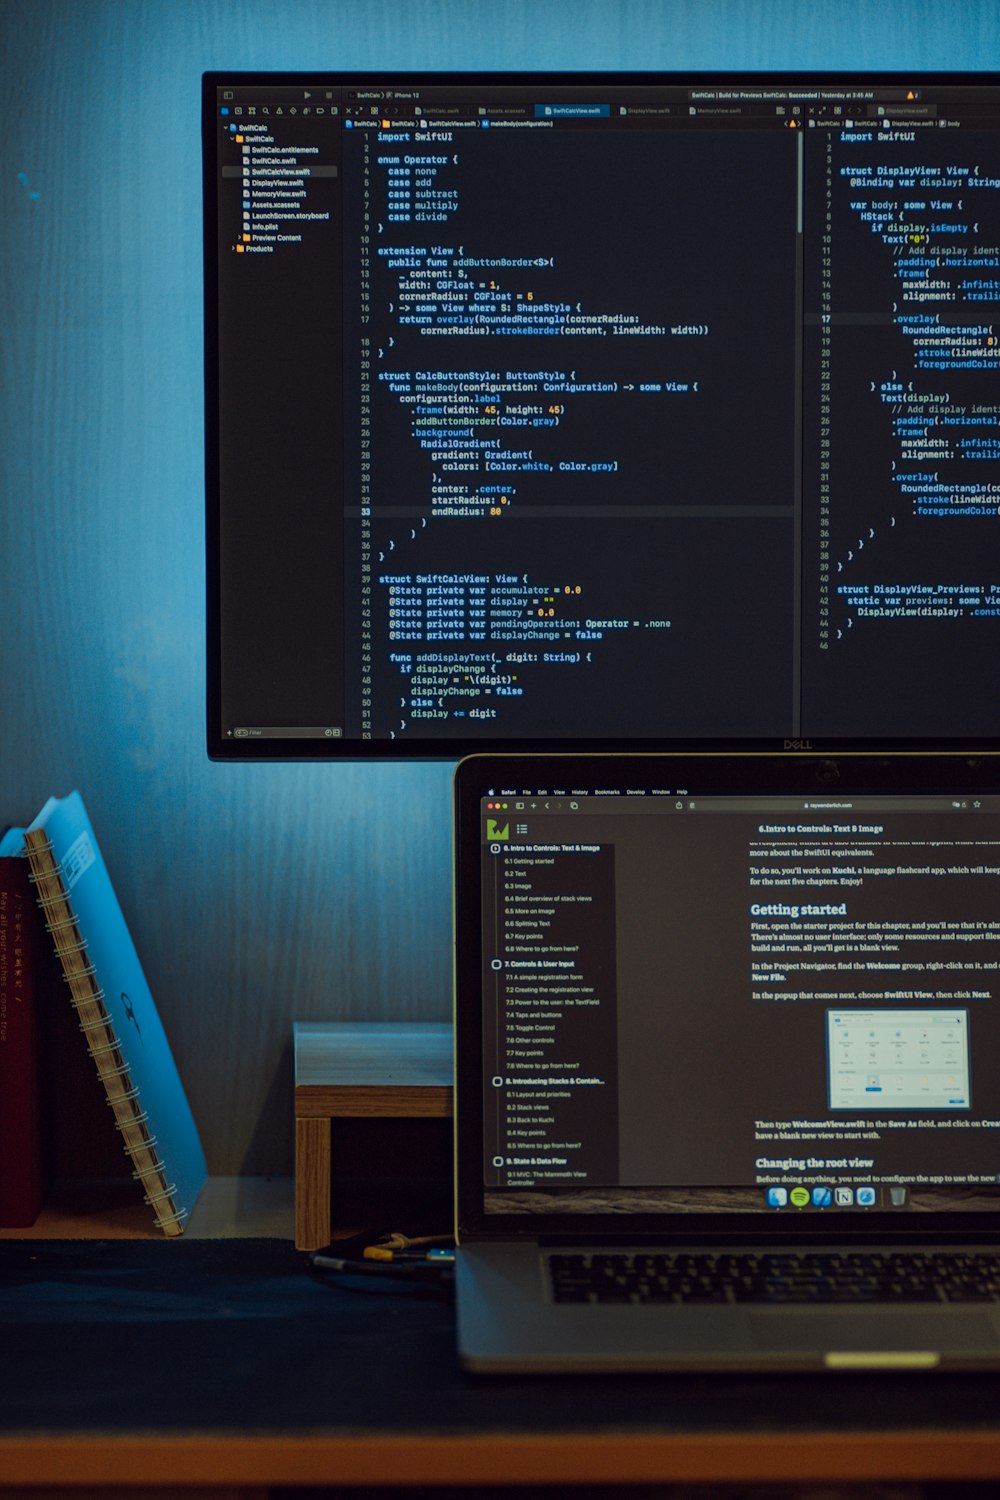 Best 20+Coding Wallpapers  Download Free Pictures & Stock Photos On  Unsplash